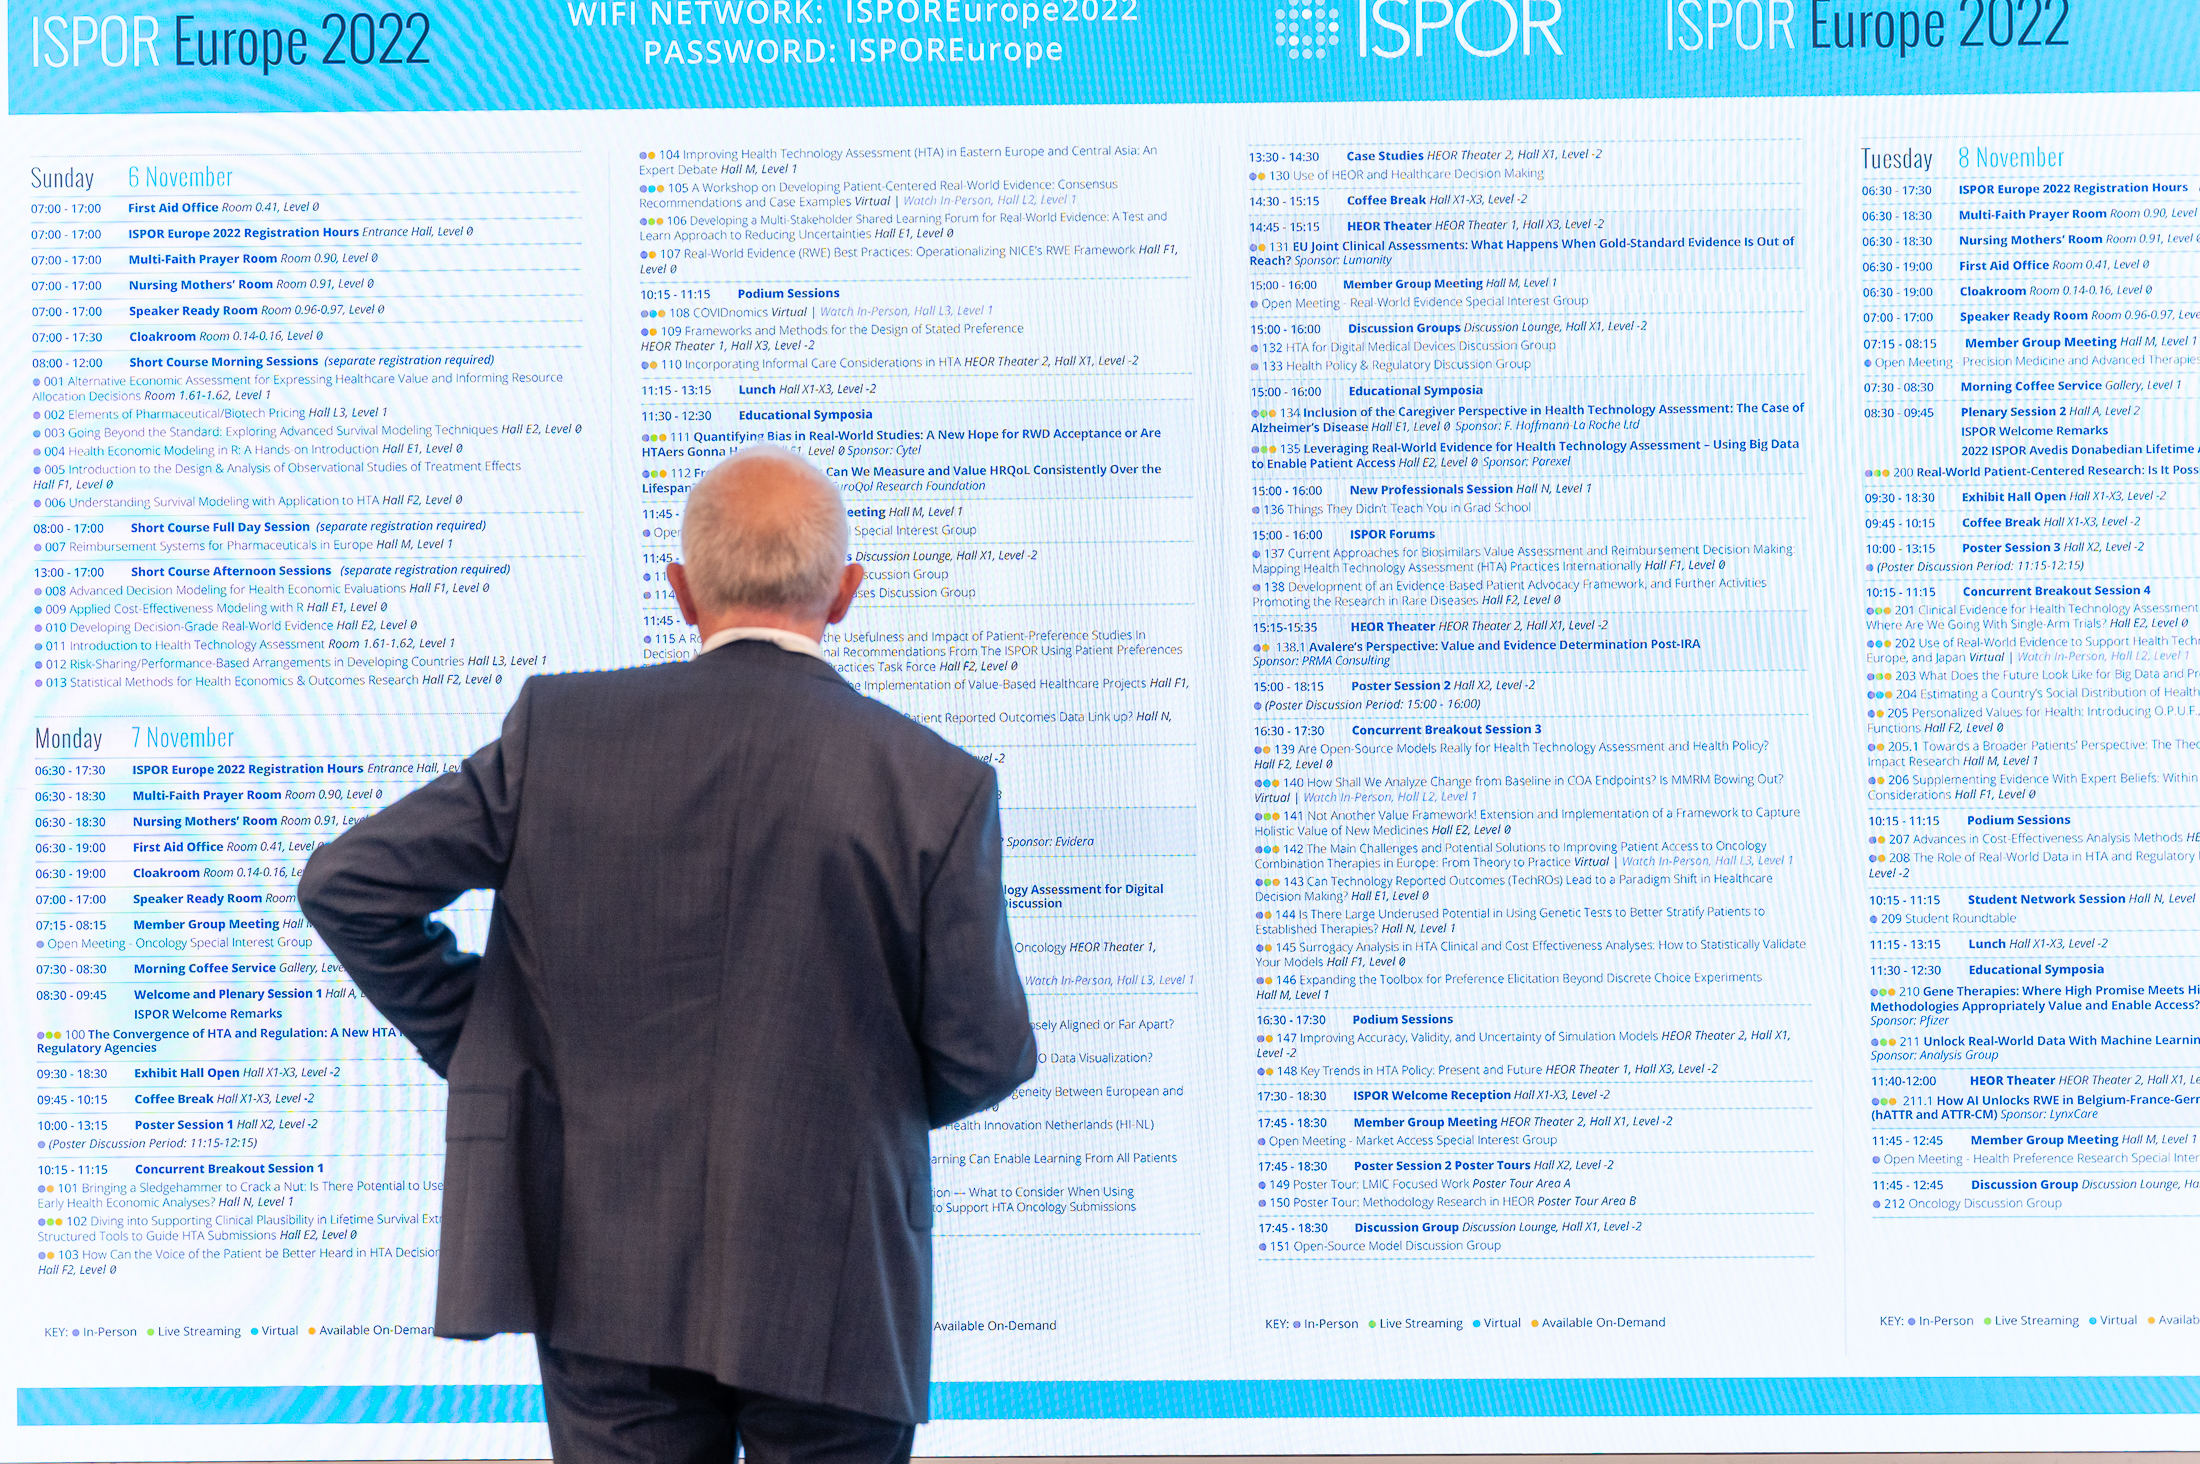 Delegate viewing a large screen monitor of the conference program